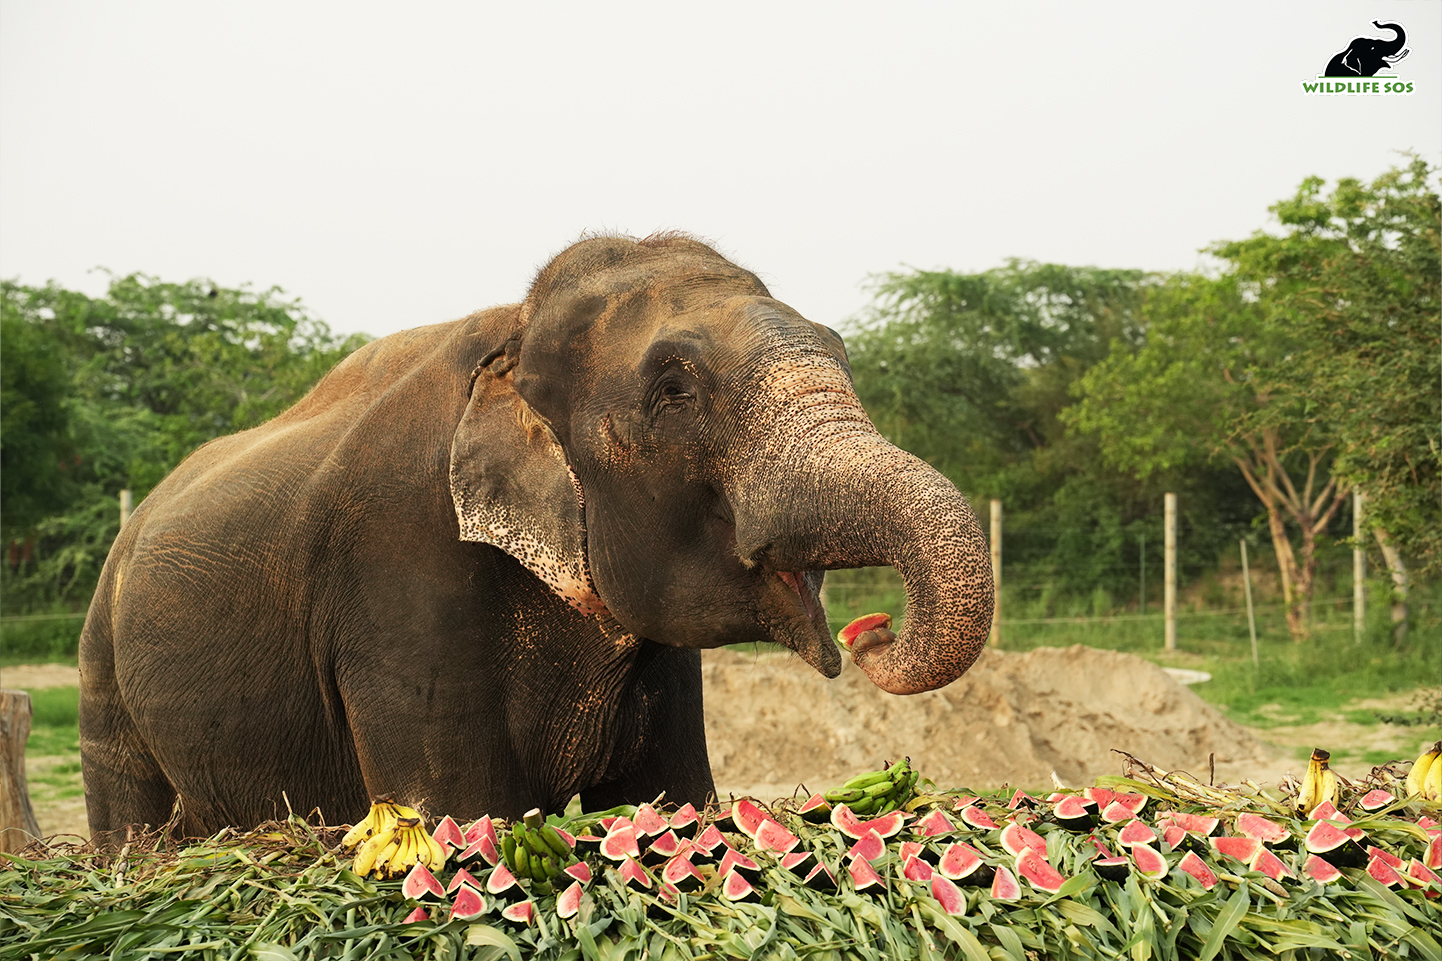 Raju, the elephant enters tenth year of freedom